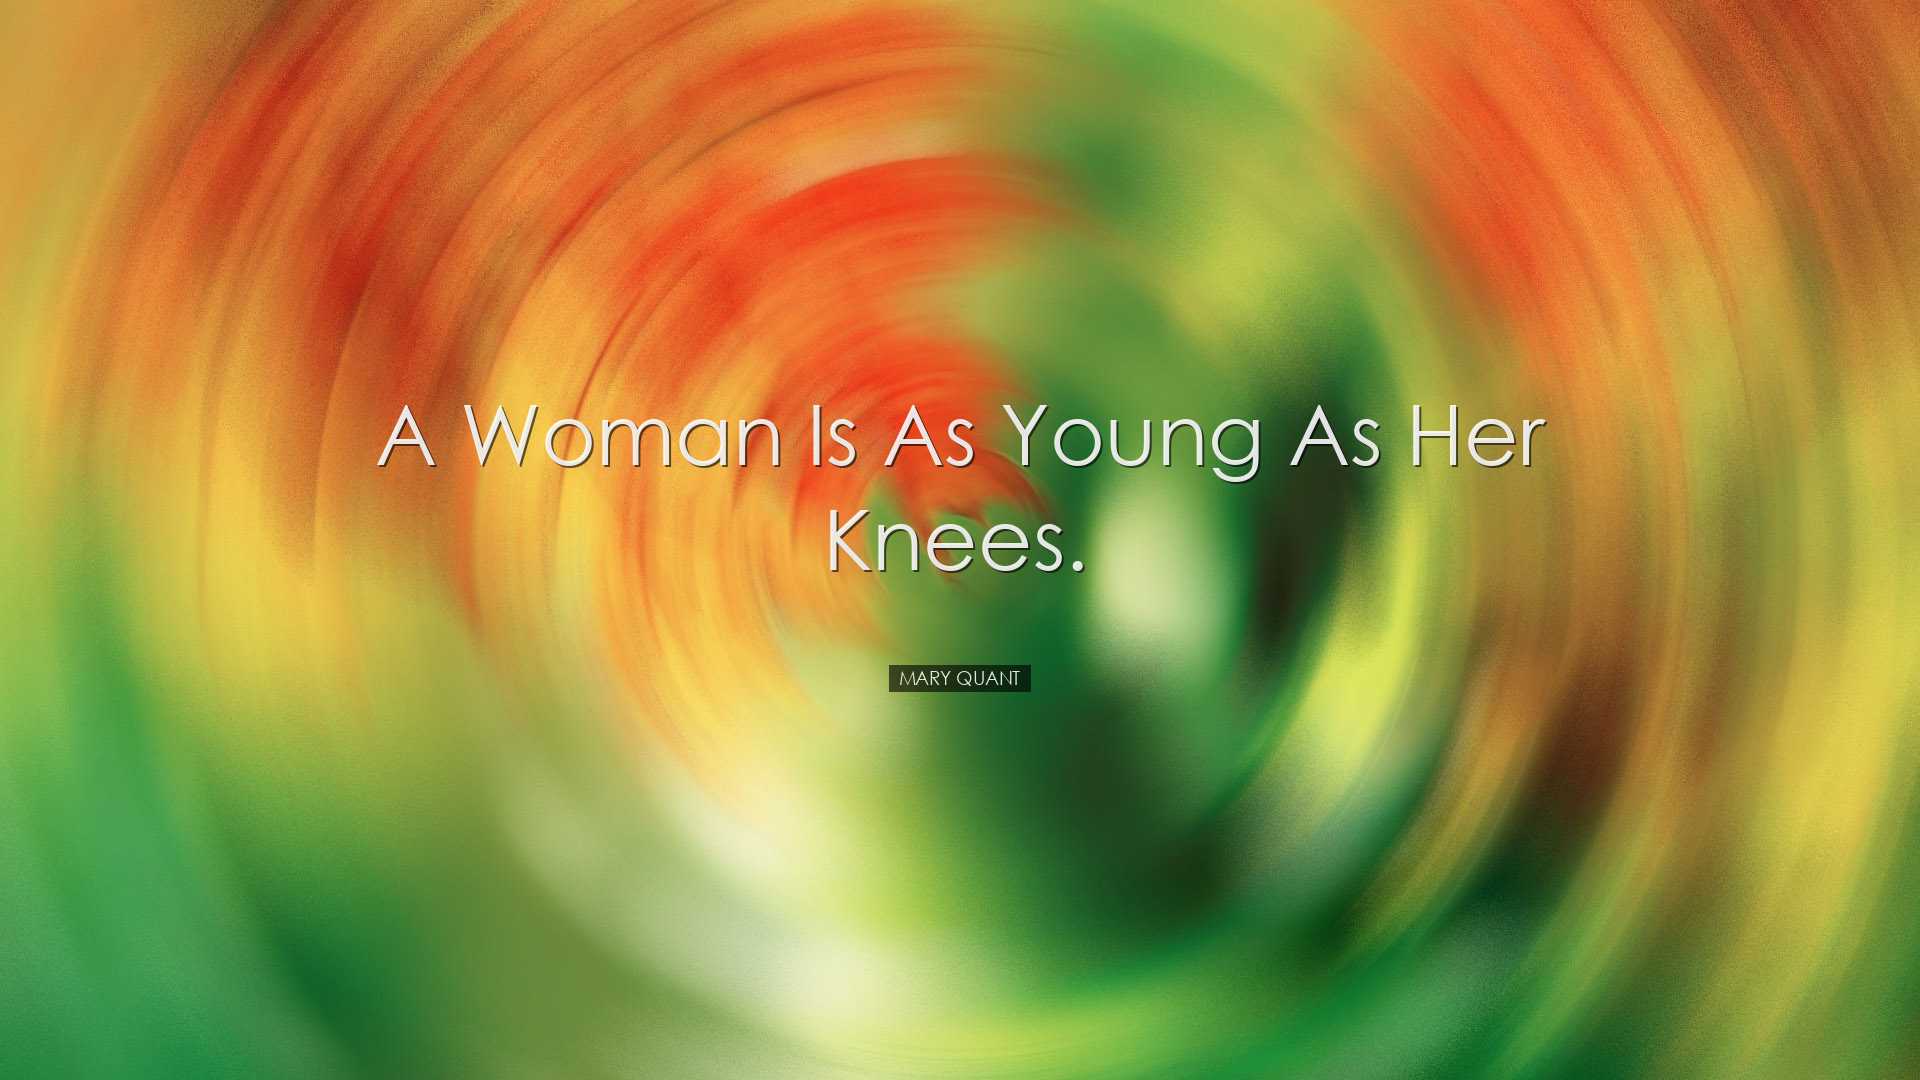 A woman is as young as her knees. - Mary Quant